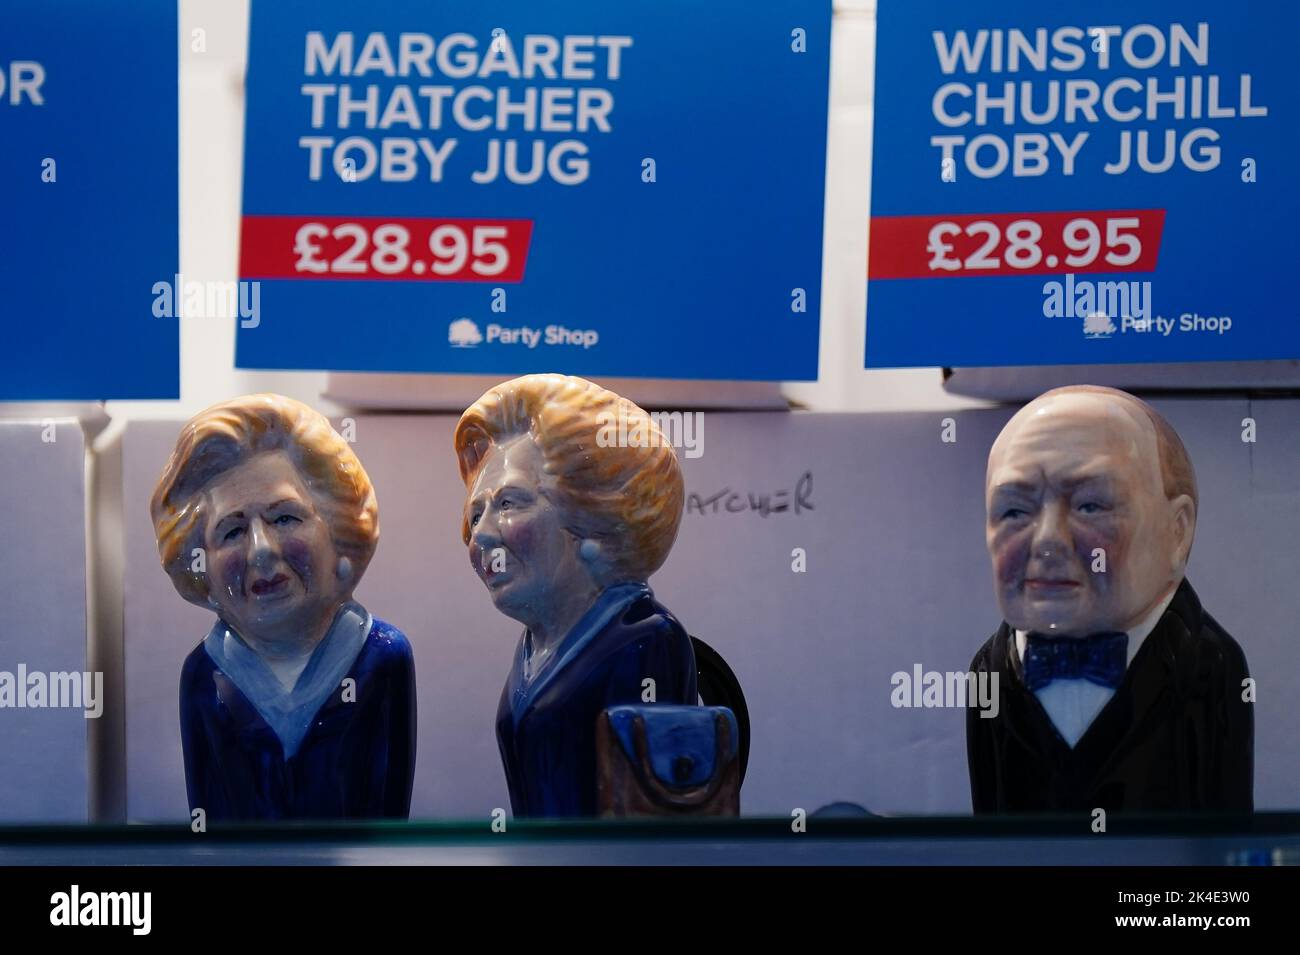 Toby jugs of Margaret Thatcher and Winston Churchill on sale during the Conservative Party annual conference at the International Convention Centre in Birmingham. Picture date: Sunday October 2, 2022. Stock Photo